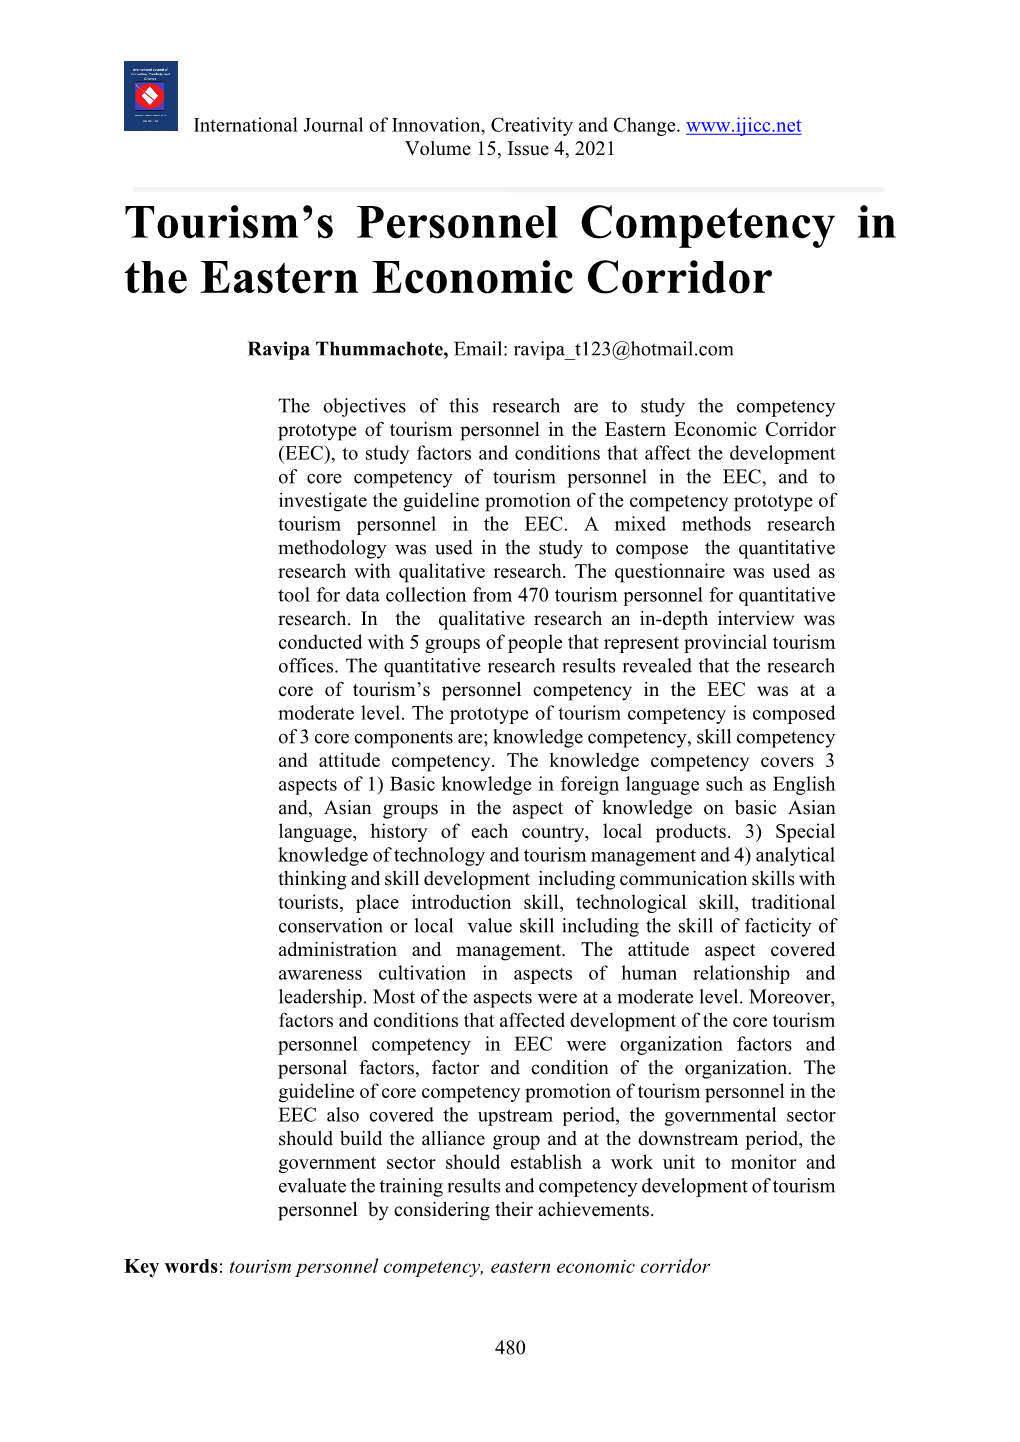 Tourism's Personnel Competency in the Eastern Economic Corridor